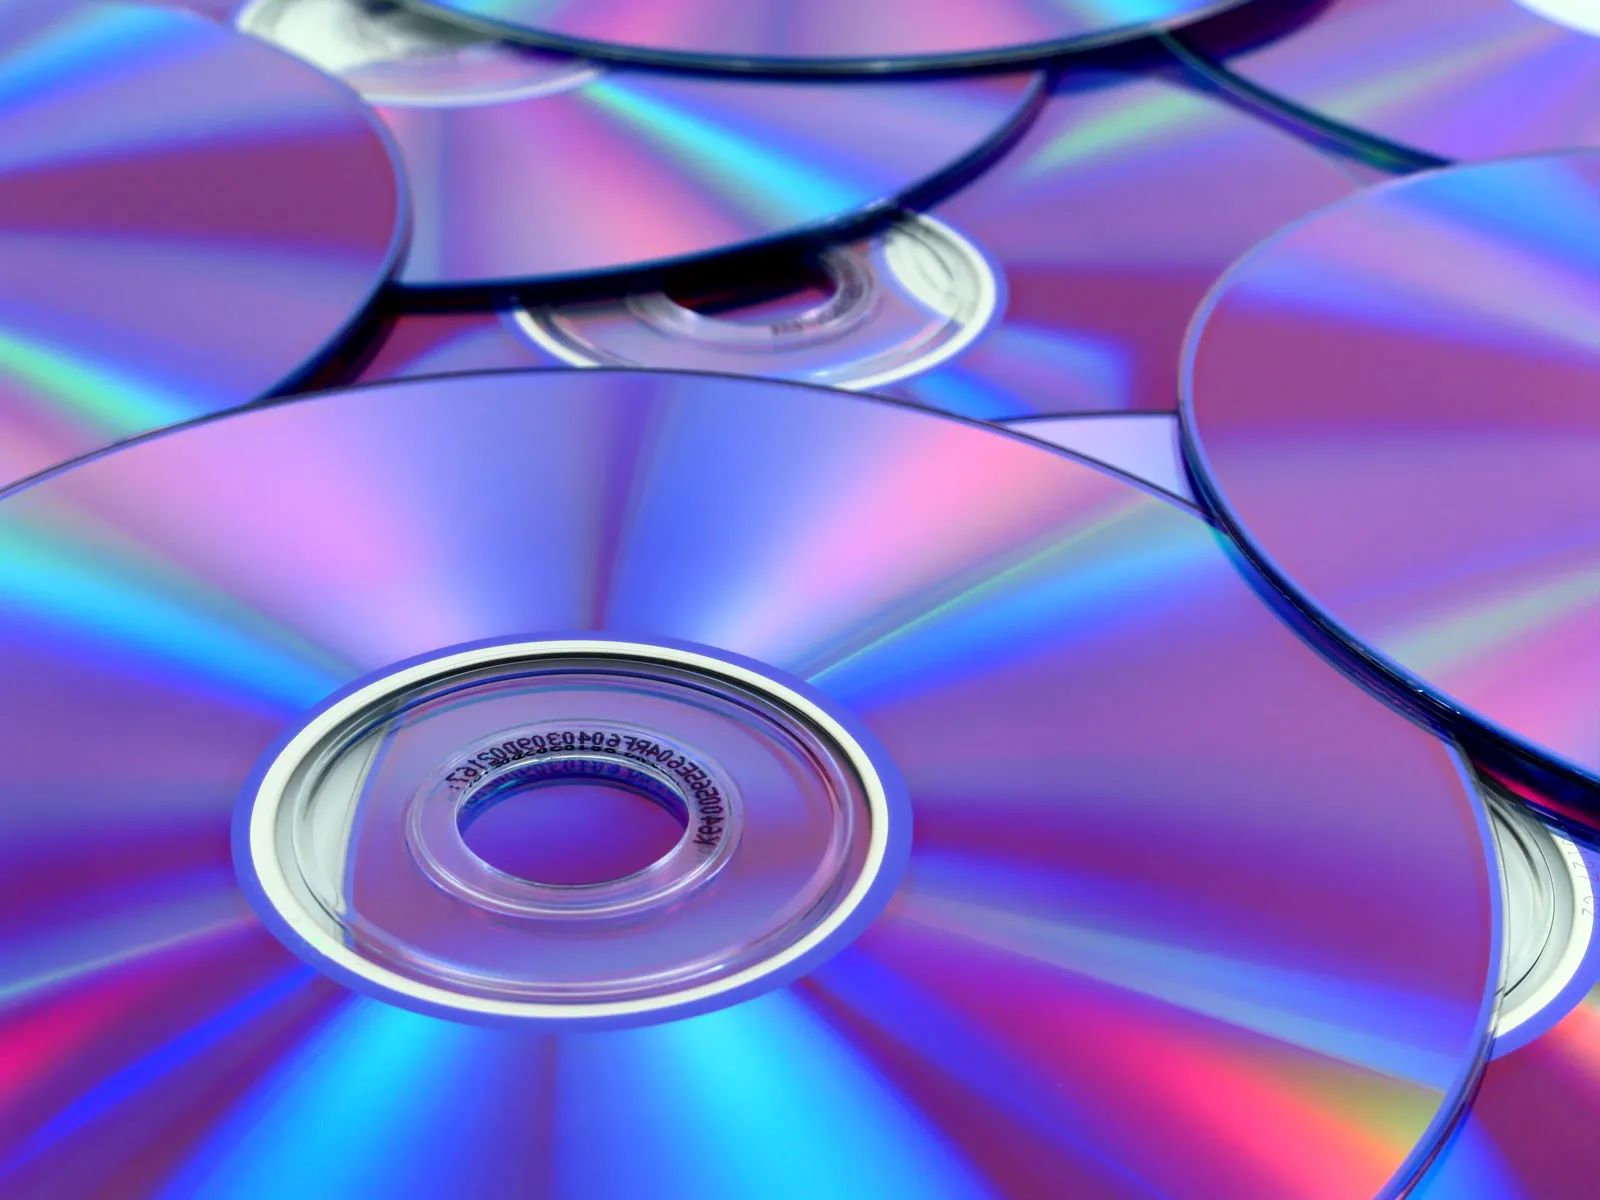 How To Make A CD With Pictures And Background Music